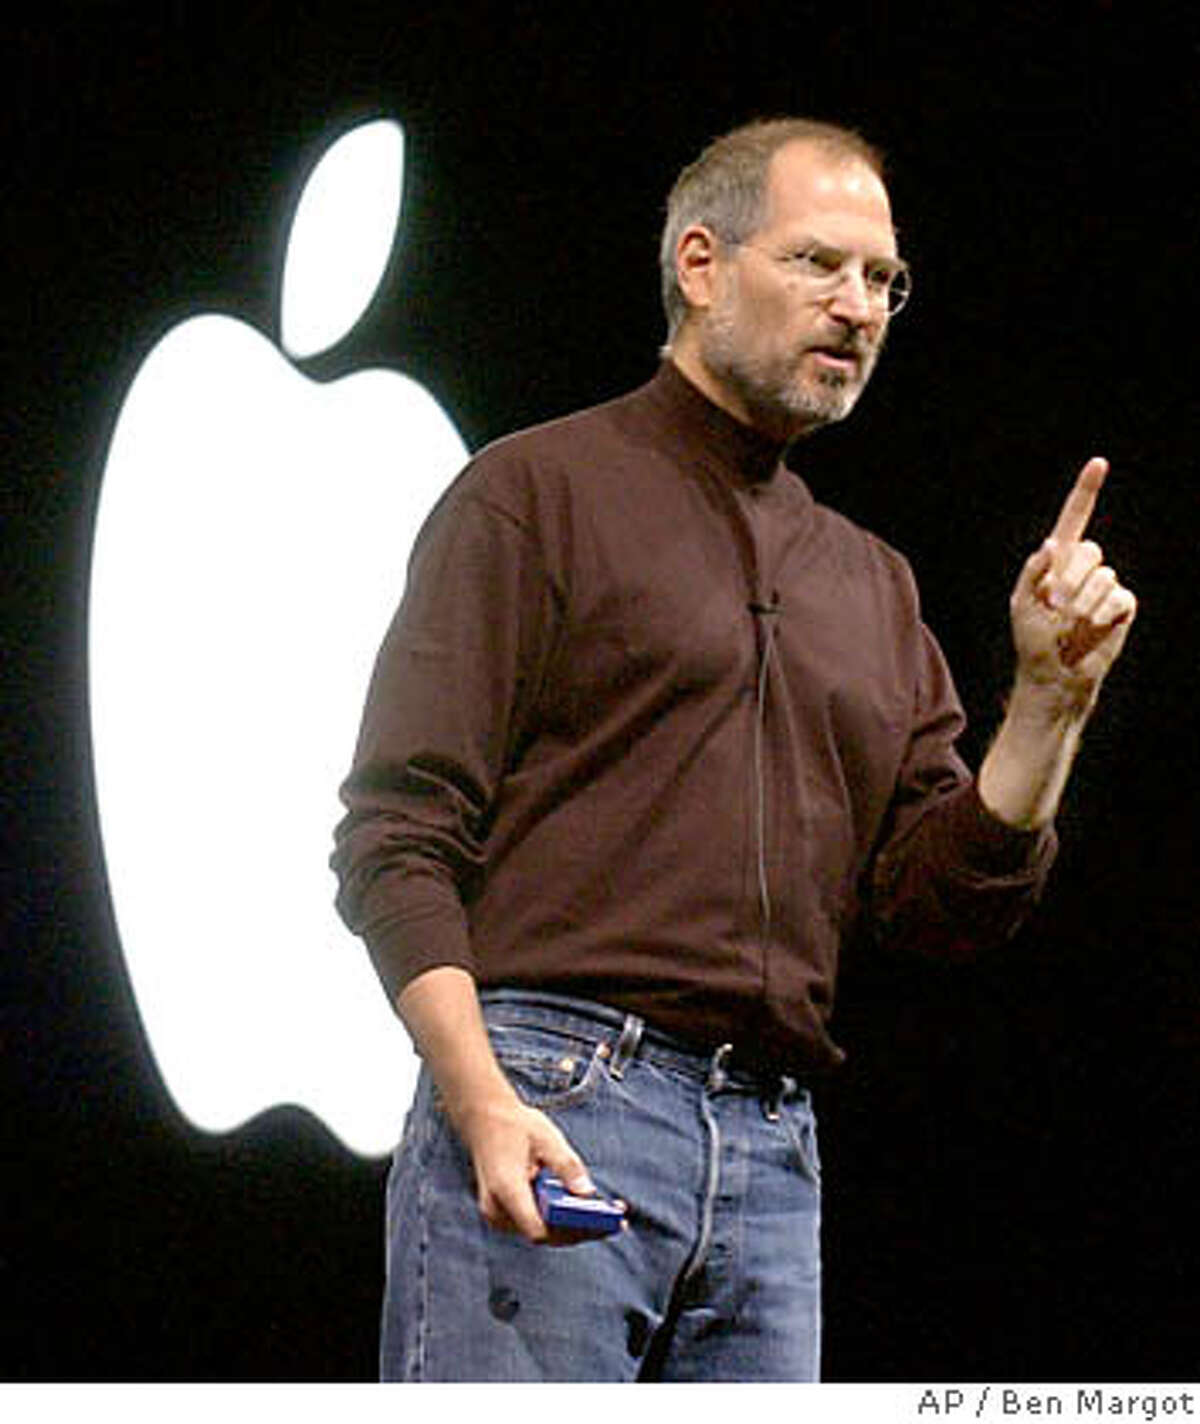 ** FILE ** Apple Computer, Inc., CEO Steve Jobs gestures in this Oct. 16. 2003 file photo, during a media presentation in San Francisco. Jobs, the charismatic chief executive of Apple Computer Inc. and Pixar Animation Studios, said Sunday, Aug. 1, 2004, he had surgery to remove a cancerous tumor from his pancreas but added he expects a full recovery. (AP Photo/Ben Margot, File) OCT. 16, 2003 FILE PHOTO